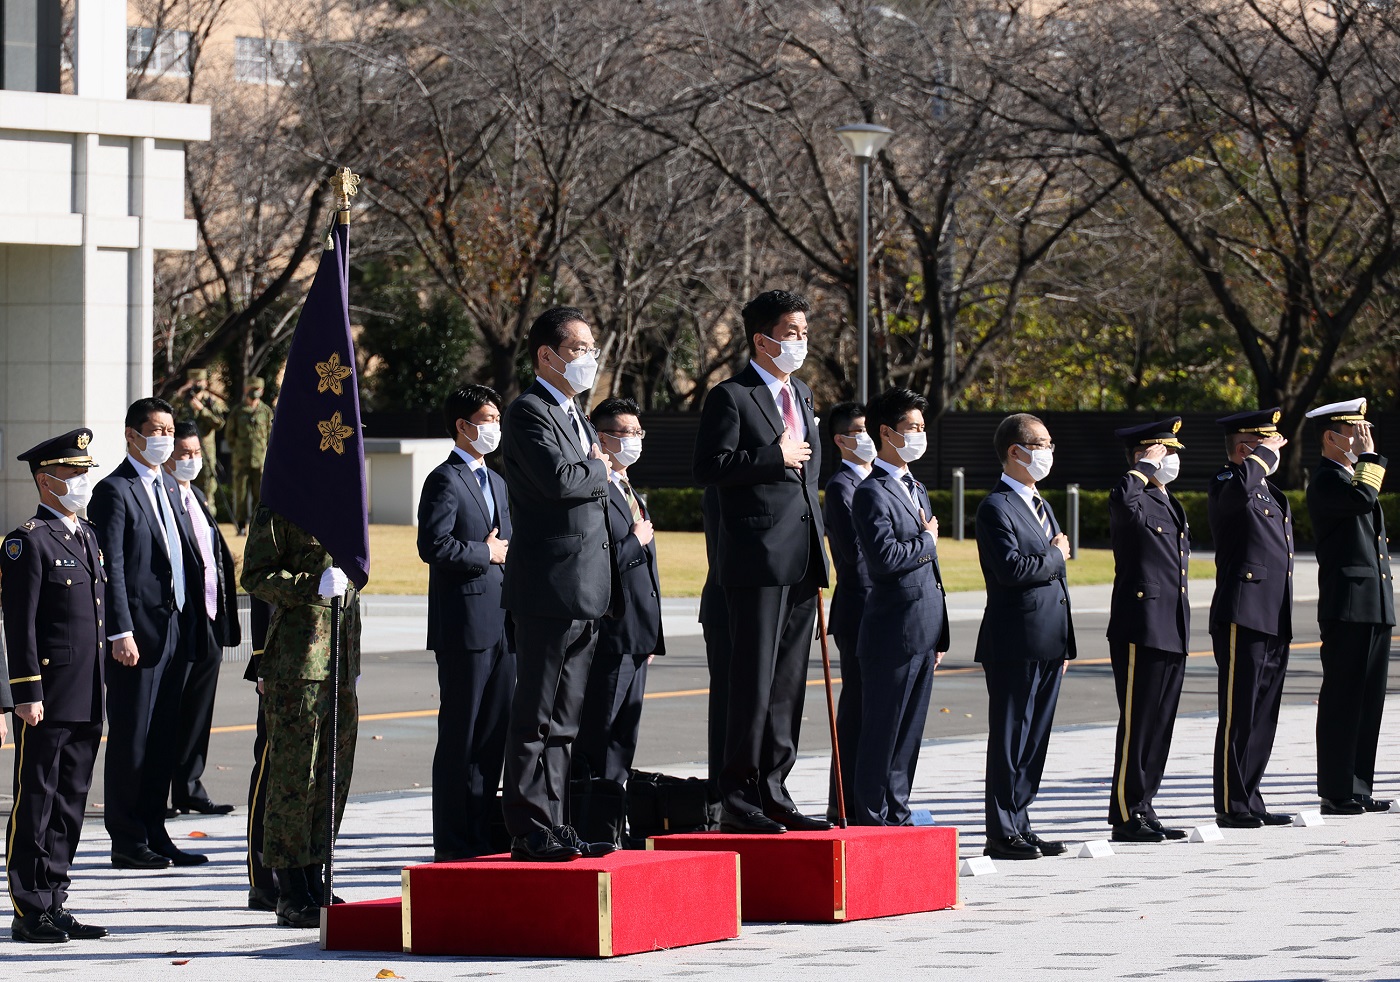 Photograph of the Prime Minister receiving a salute and attending a guard of honor ceremony (3)